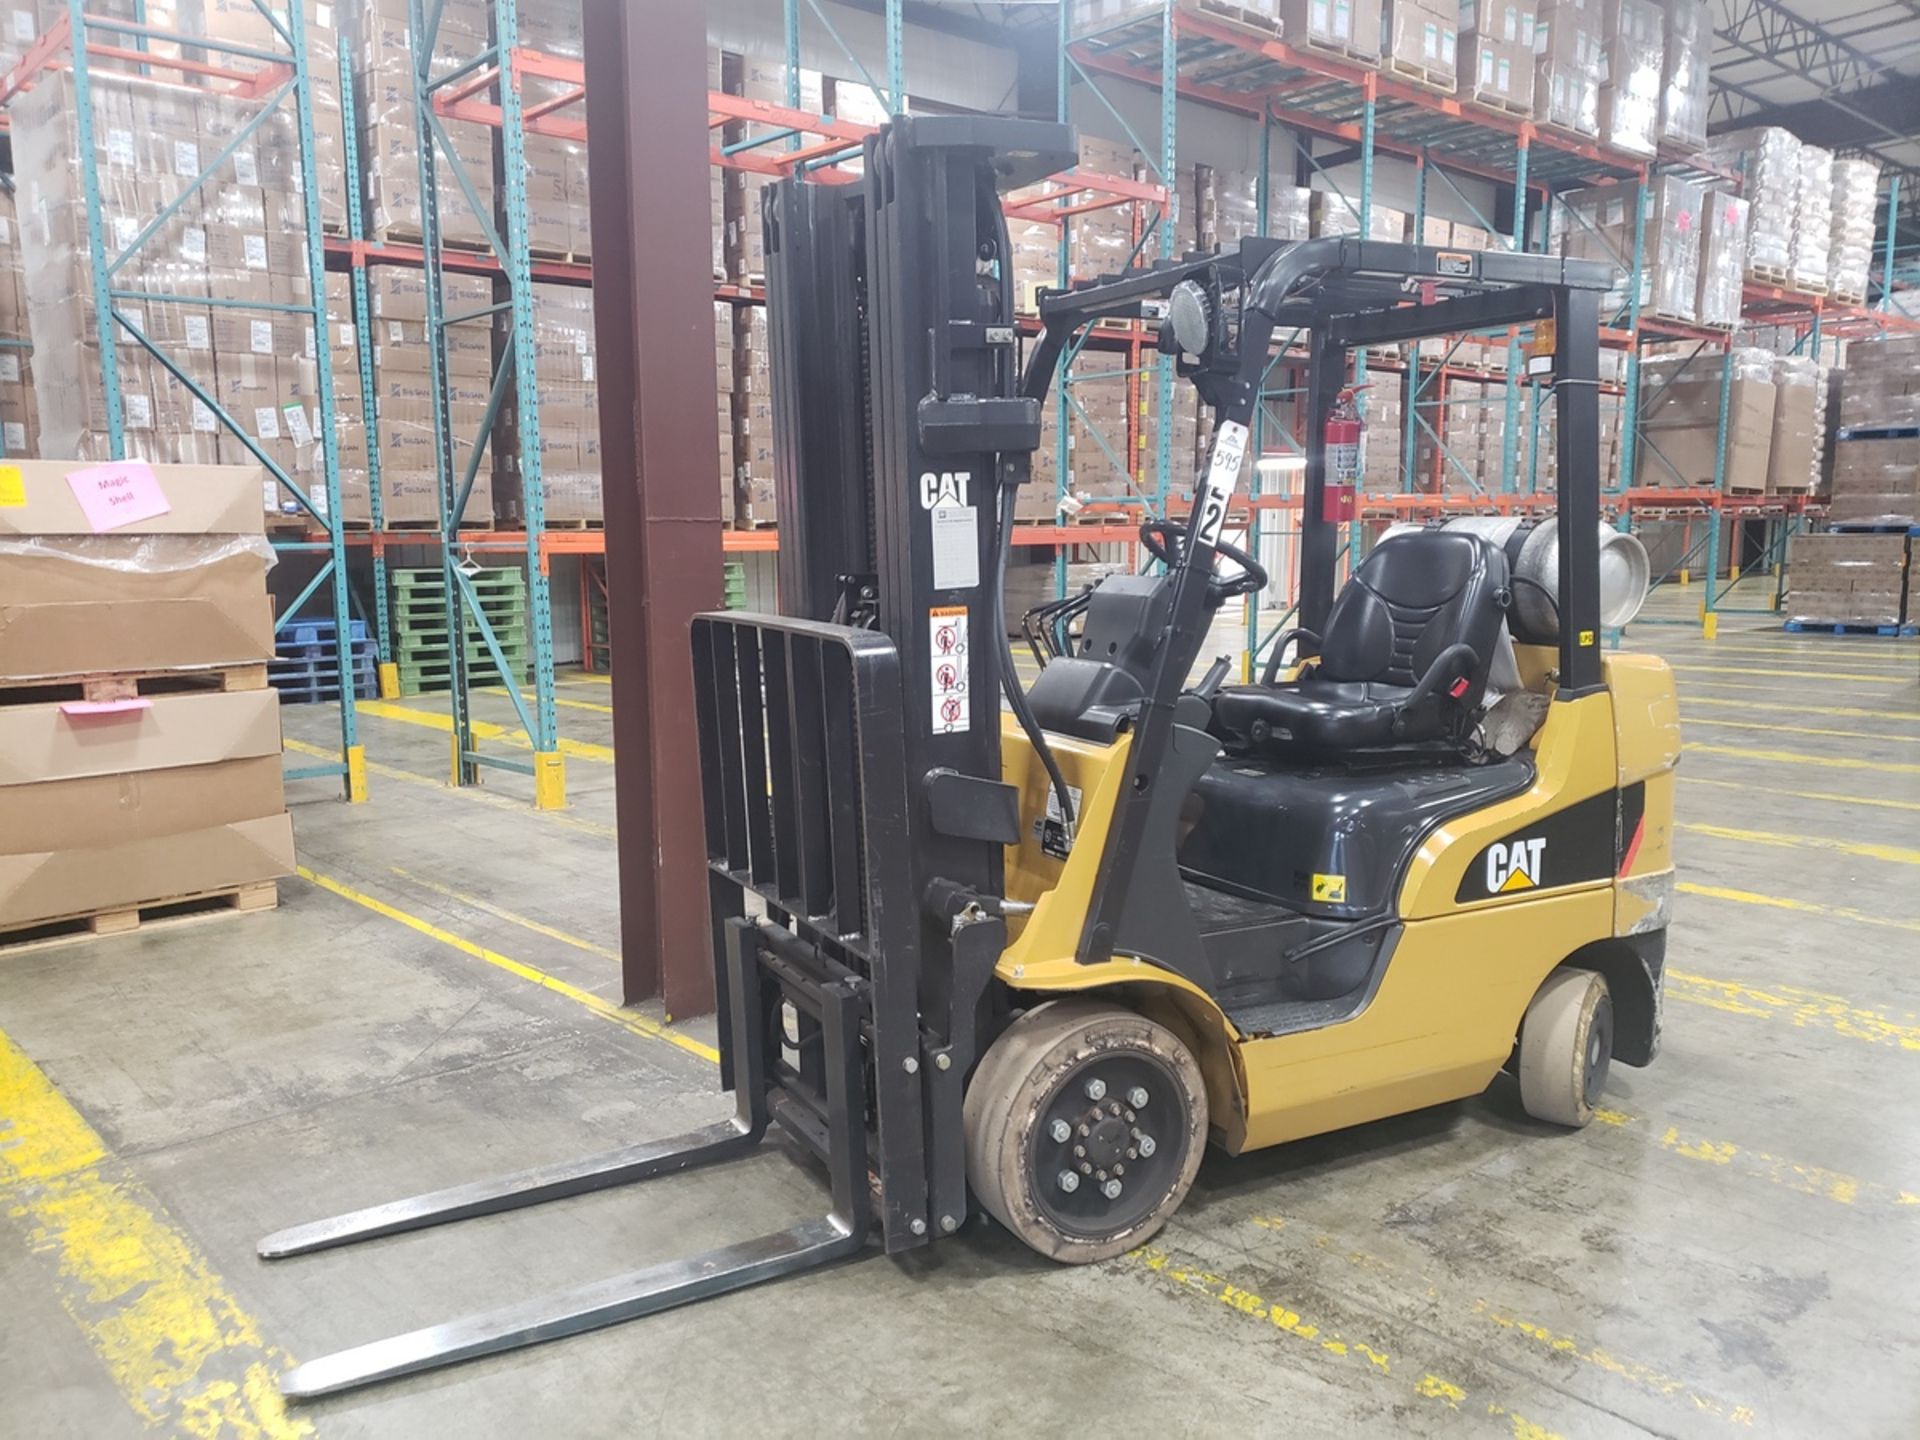 Caterpillar LP Forklift, 4600 Lb Capacity, Side Shift, 10605 Hours, M# 2C5000, S/N A | Rig Fee $150